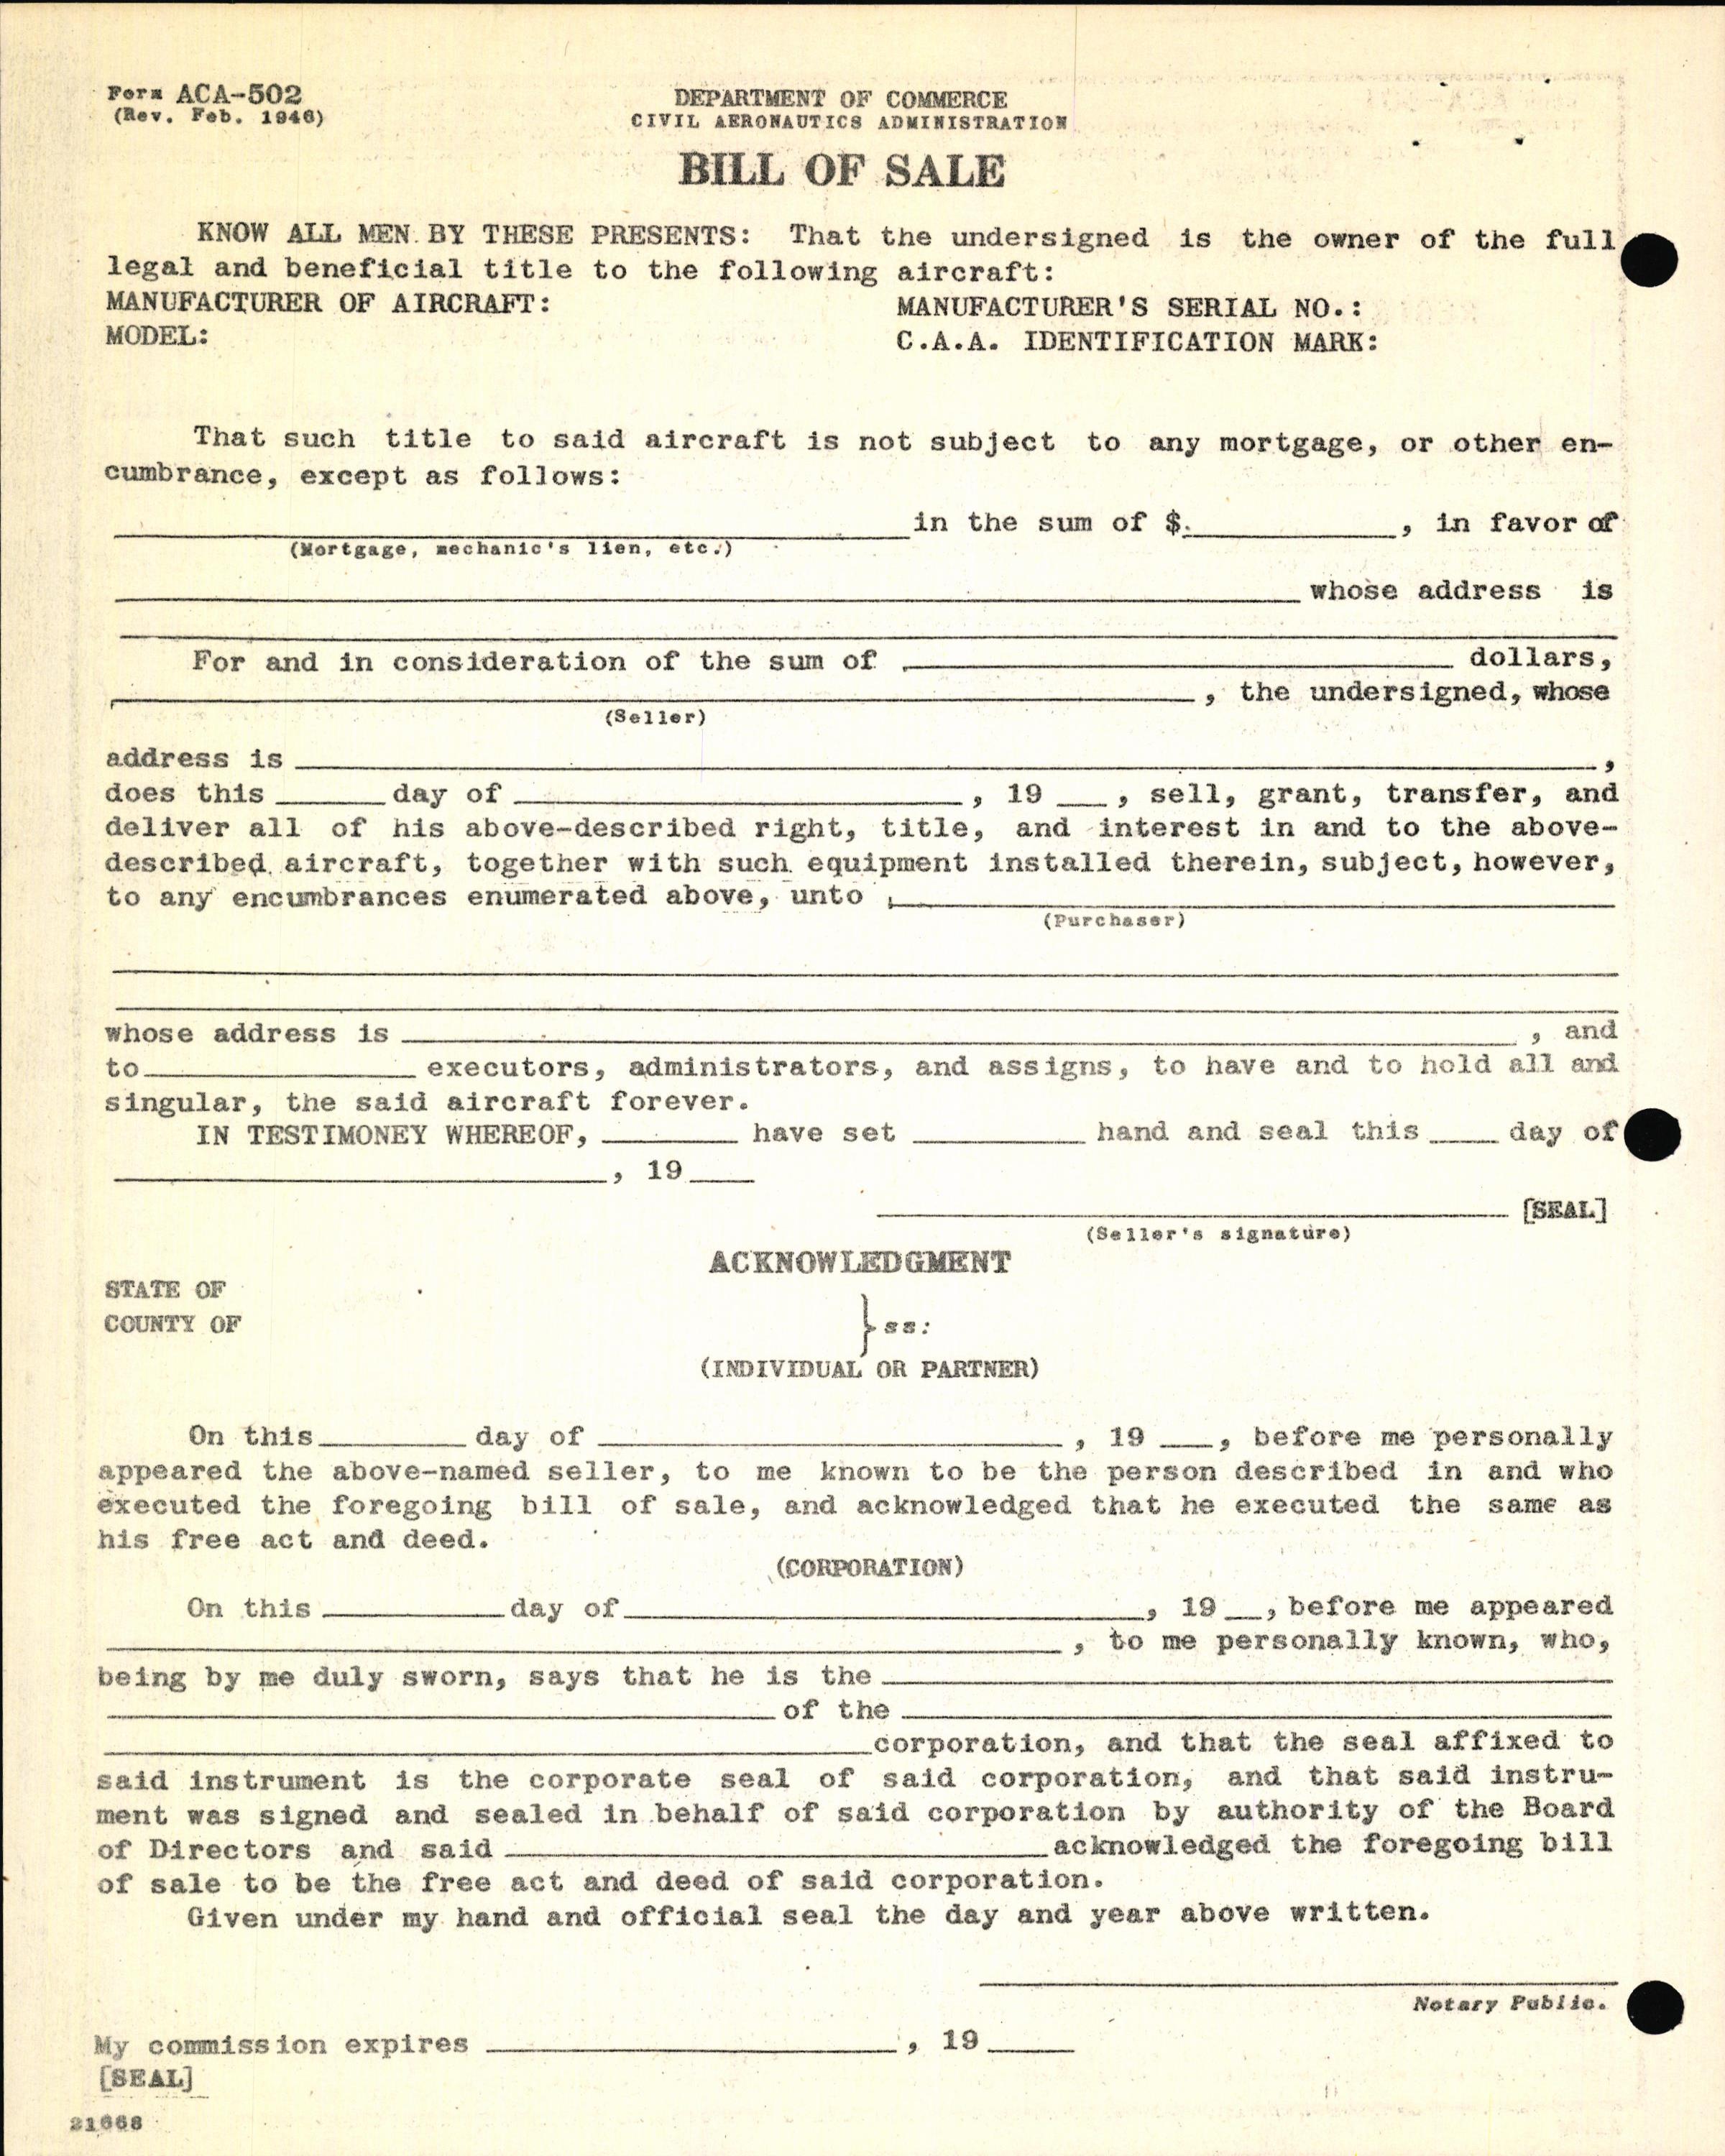 Sample page 4 from AirCorps Library document: Technical Information for Serial Number 1211